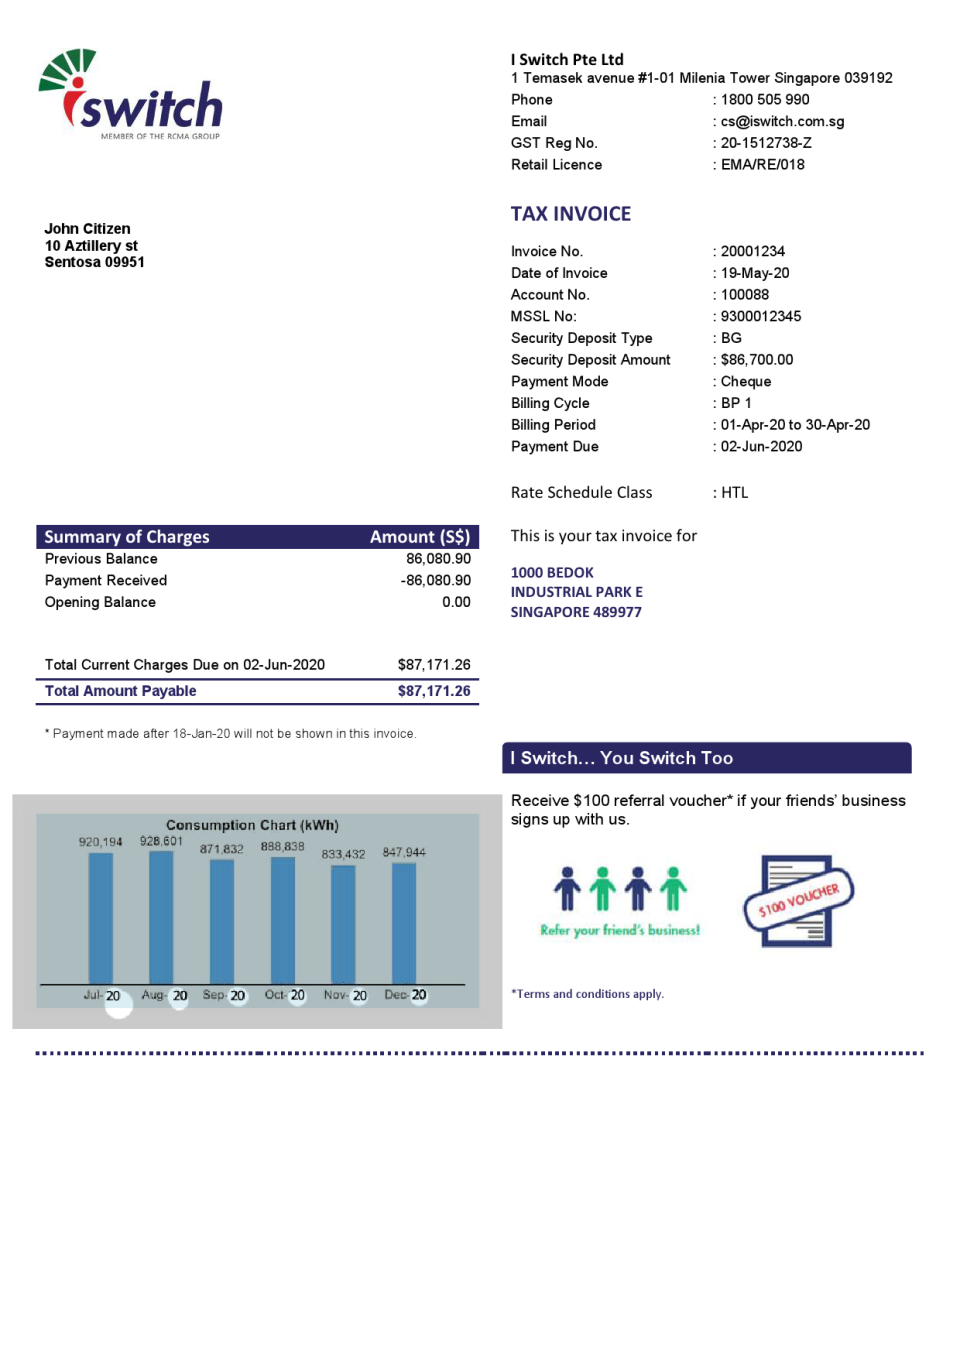 Singapore Iswitch energy utility bill template, fully editable in PSD format